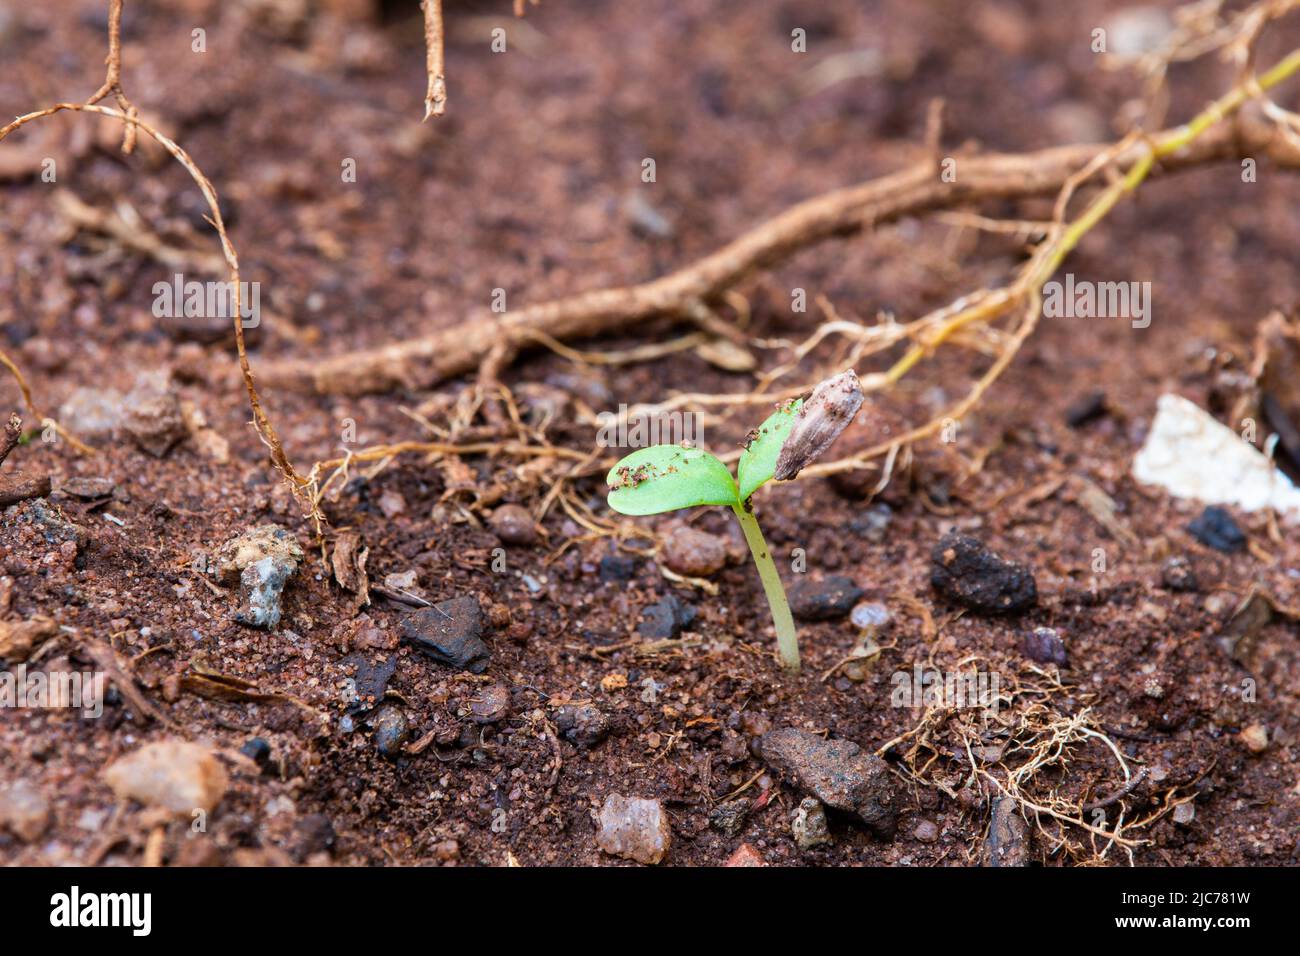 Single young seed germination and plant growing. Stock Photo